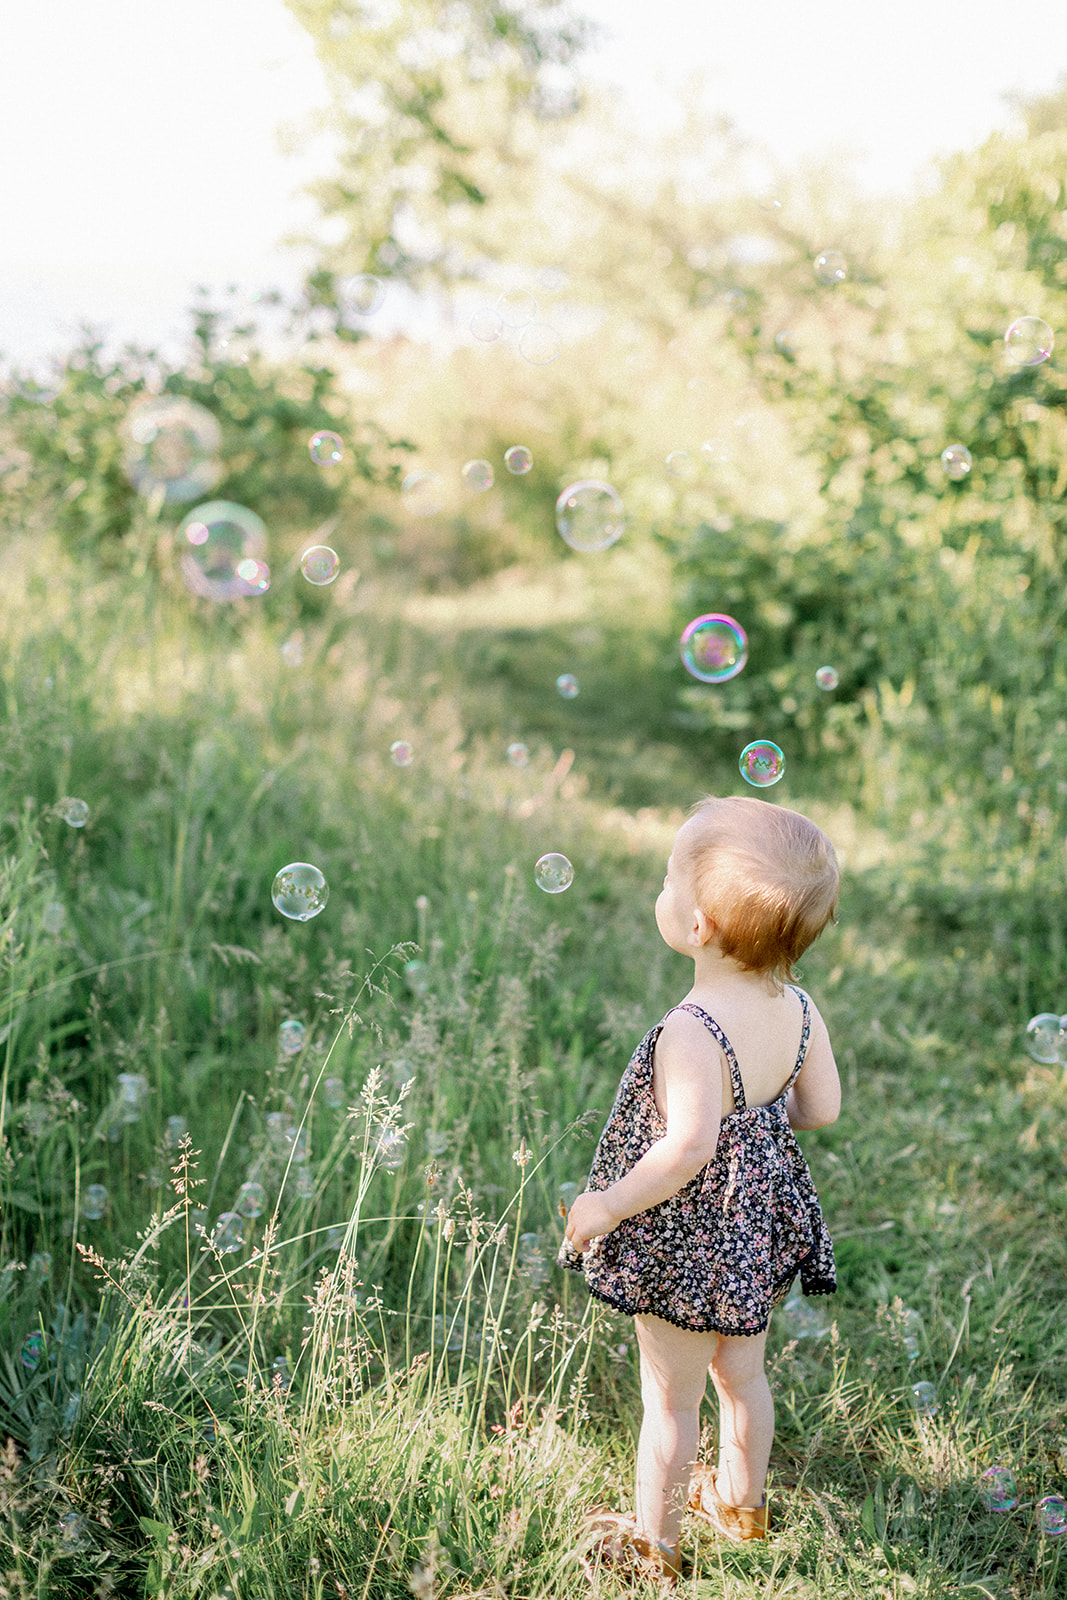 Little girl plays amongst bubbles in a moment of wonder on the Toronto Islands